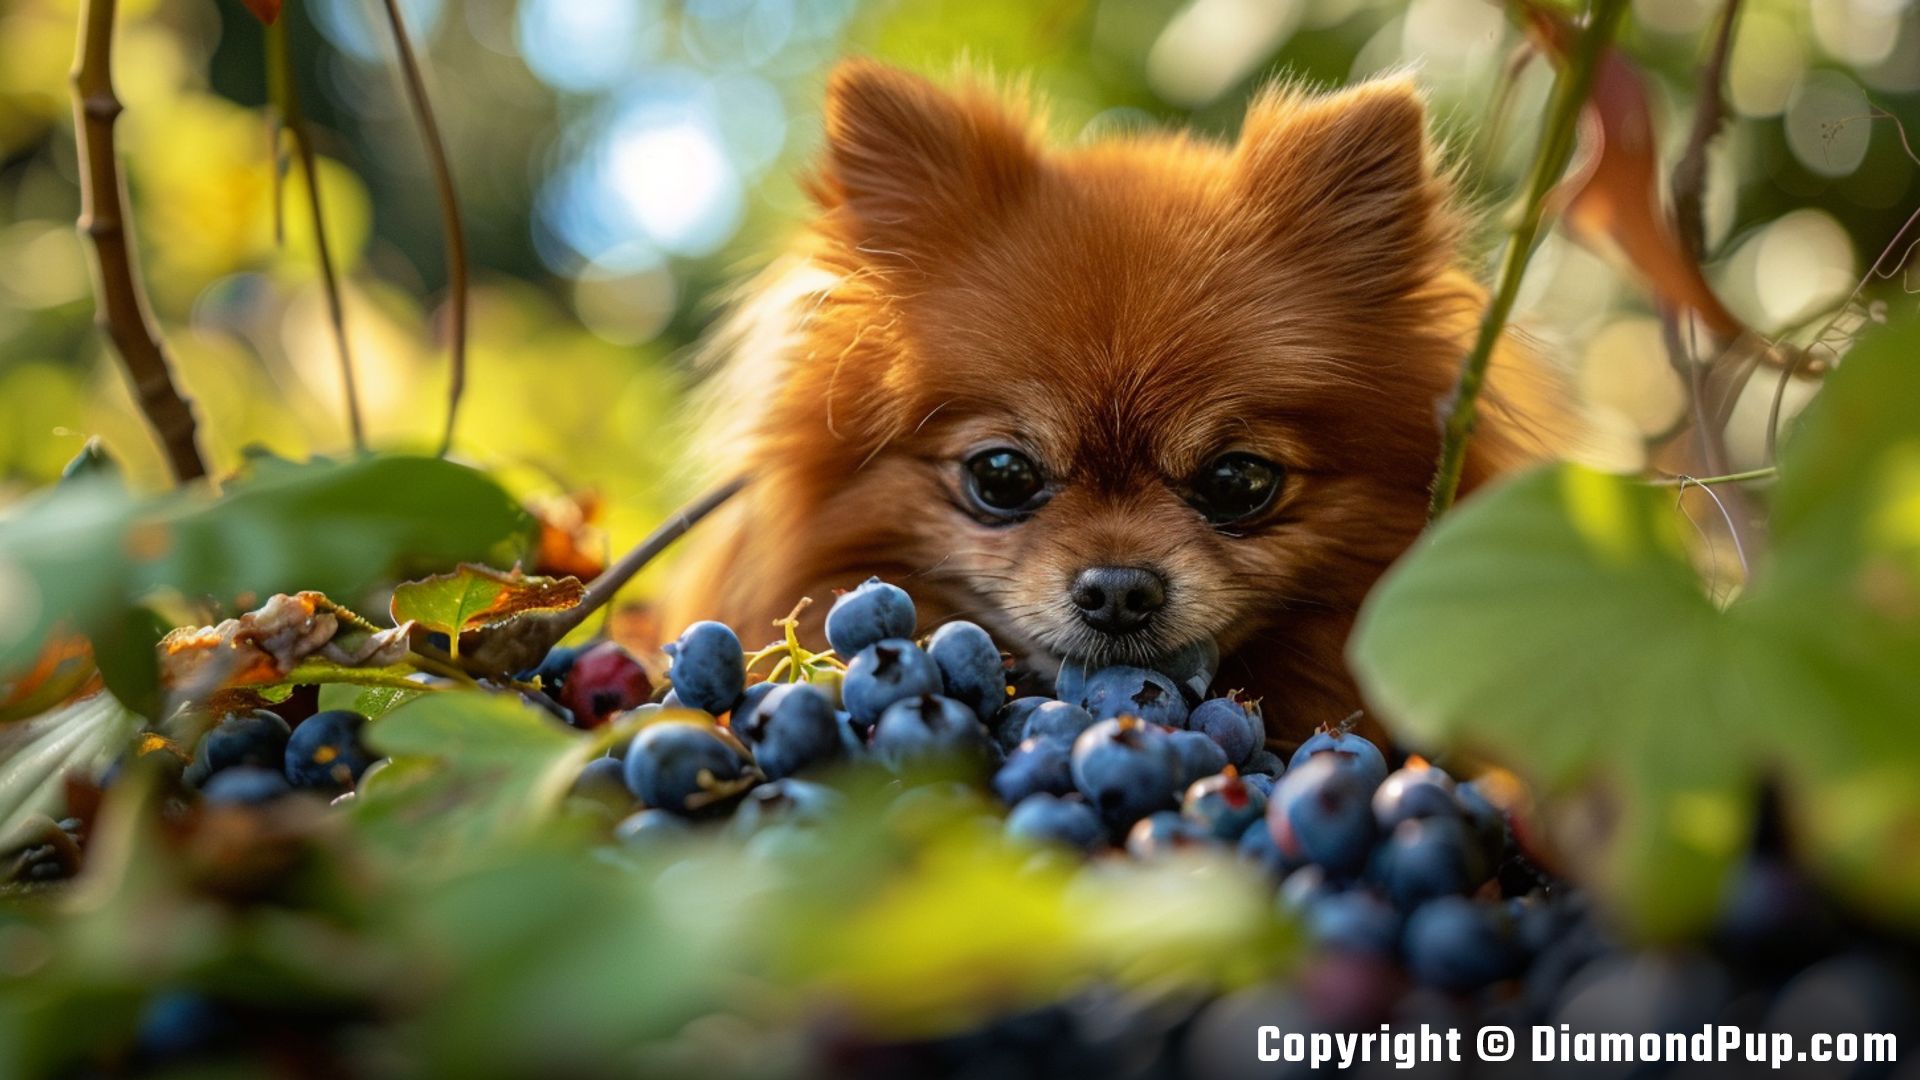 Image of a Happy Pomeranian Snacking on Blueberries